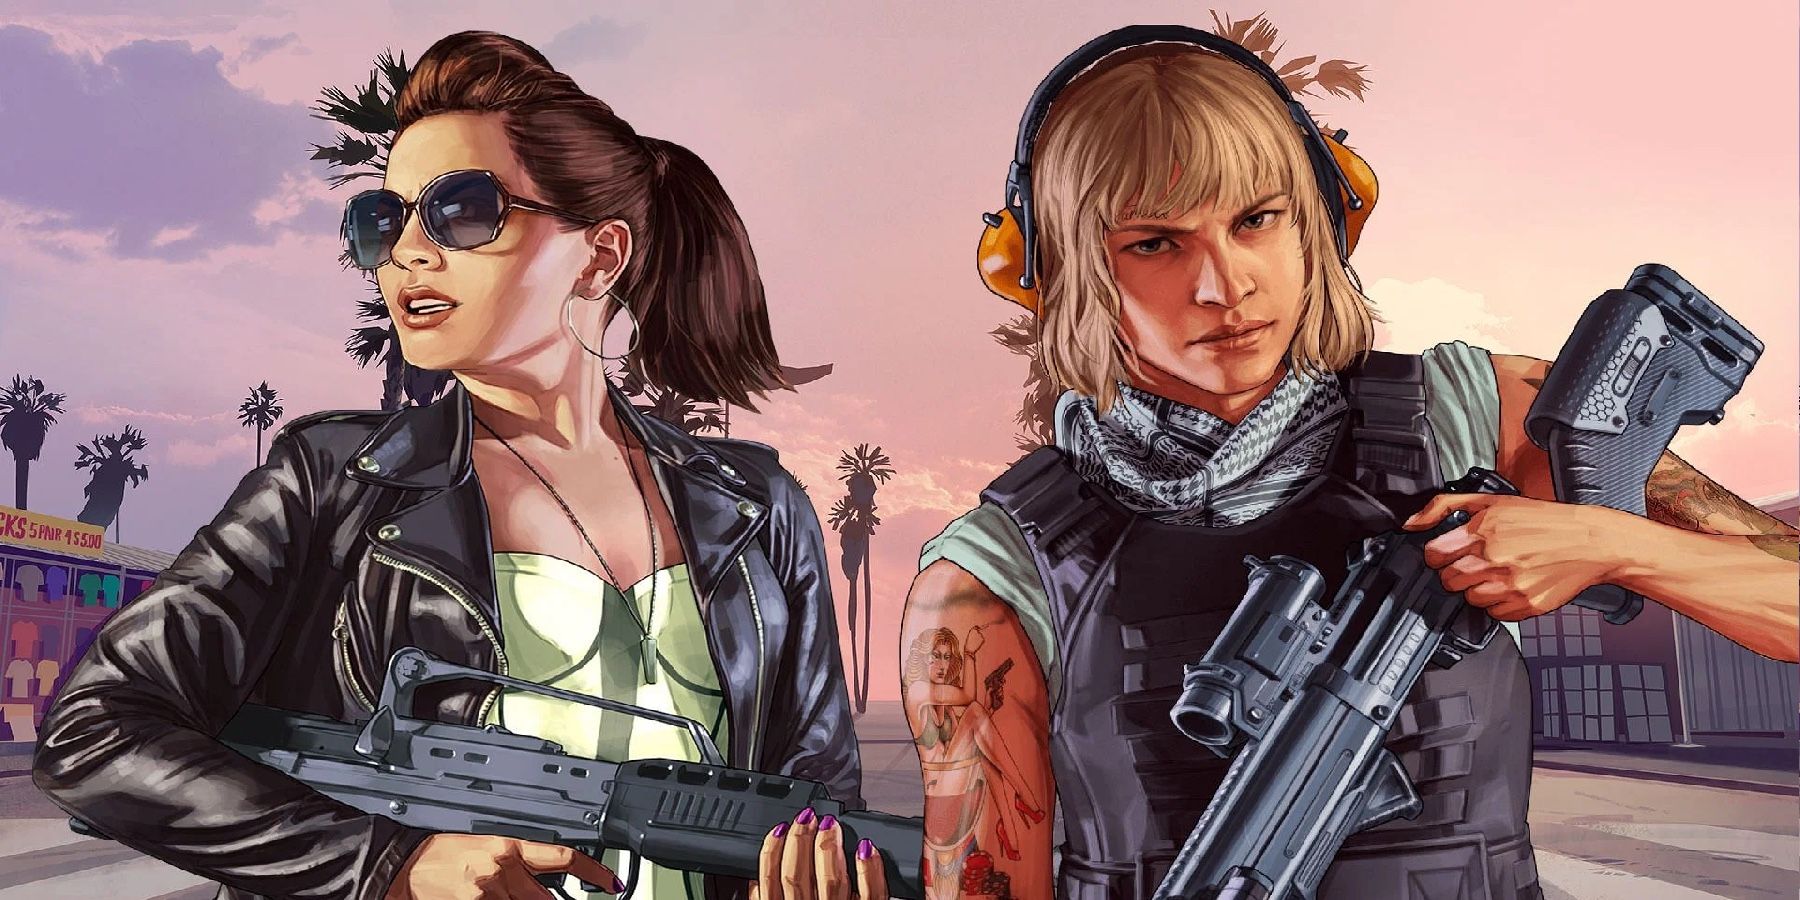 Grand Theft Auto 6 leaked videos reveal a female lead character.